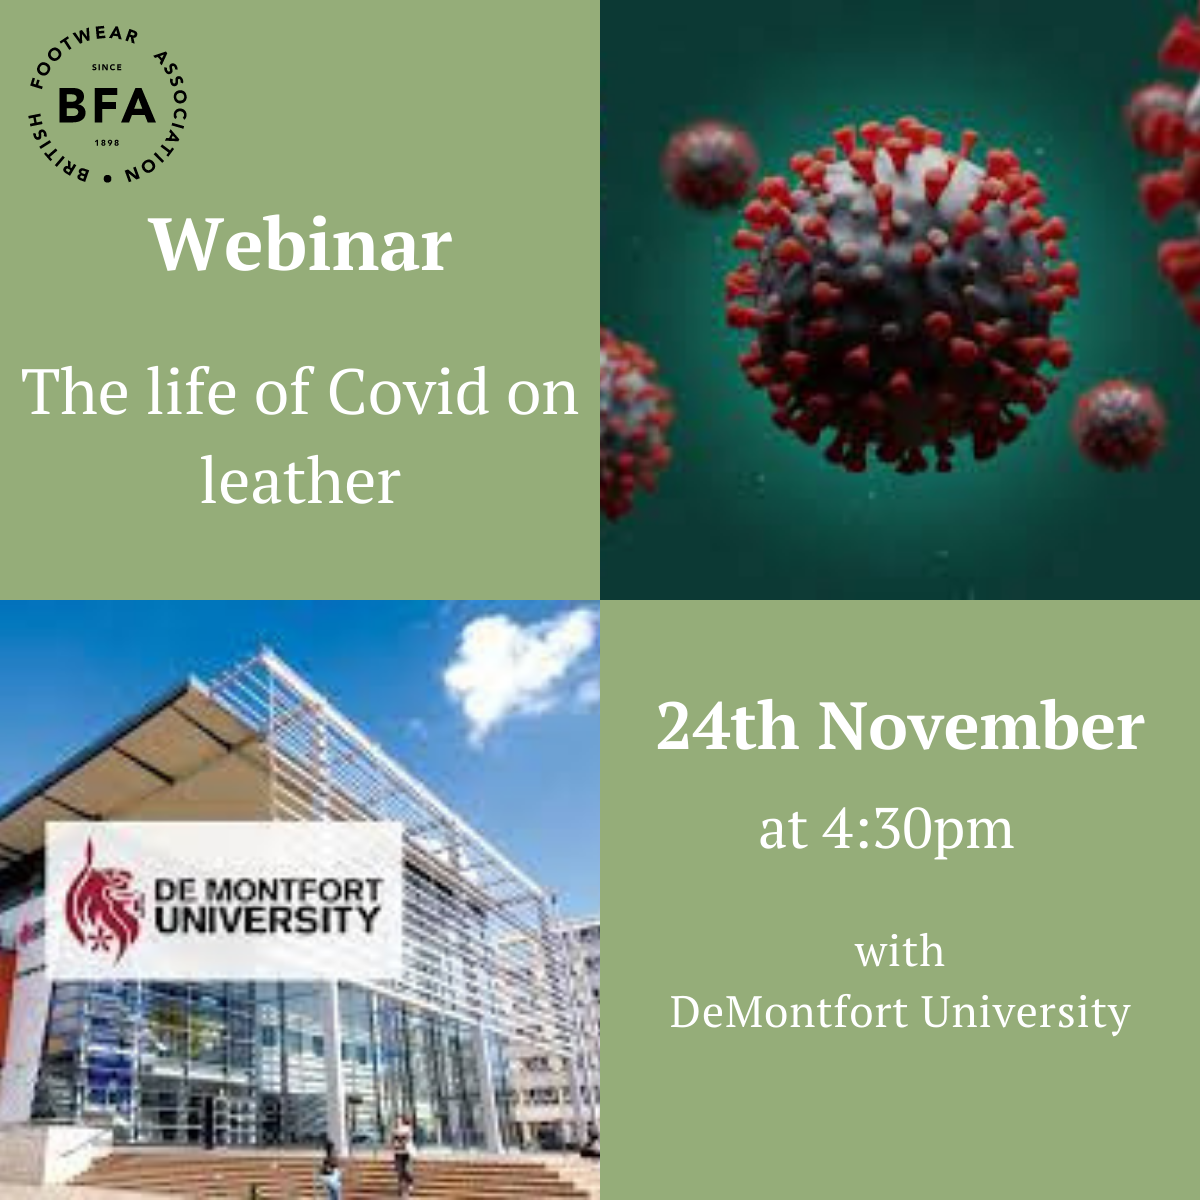 Webinar: The life of COVID on leather